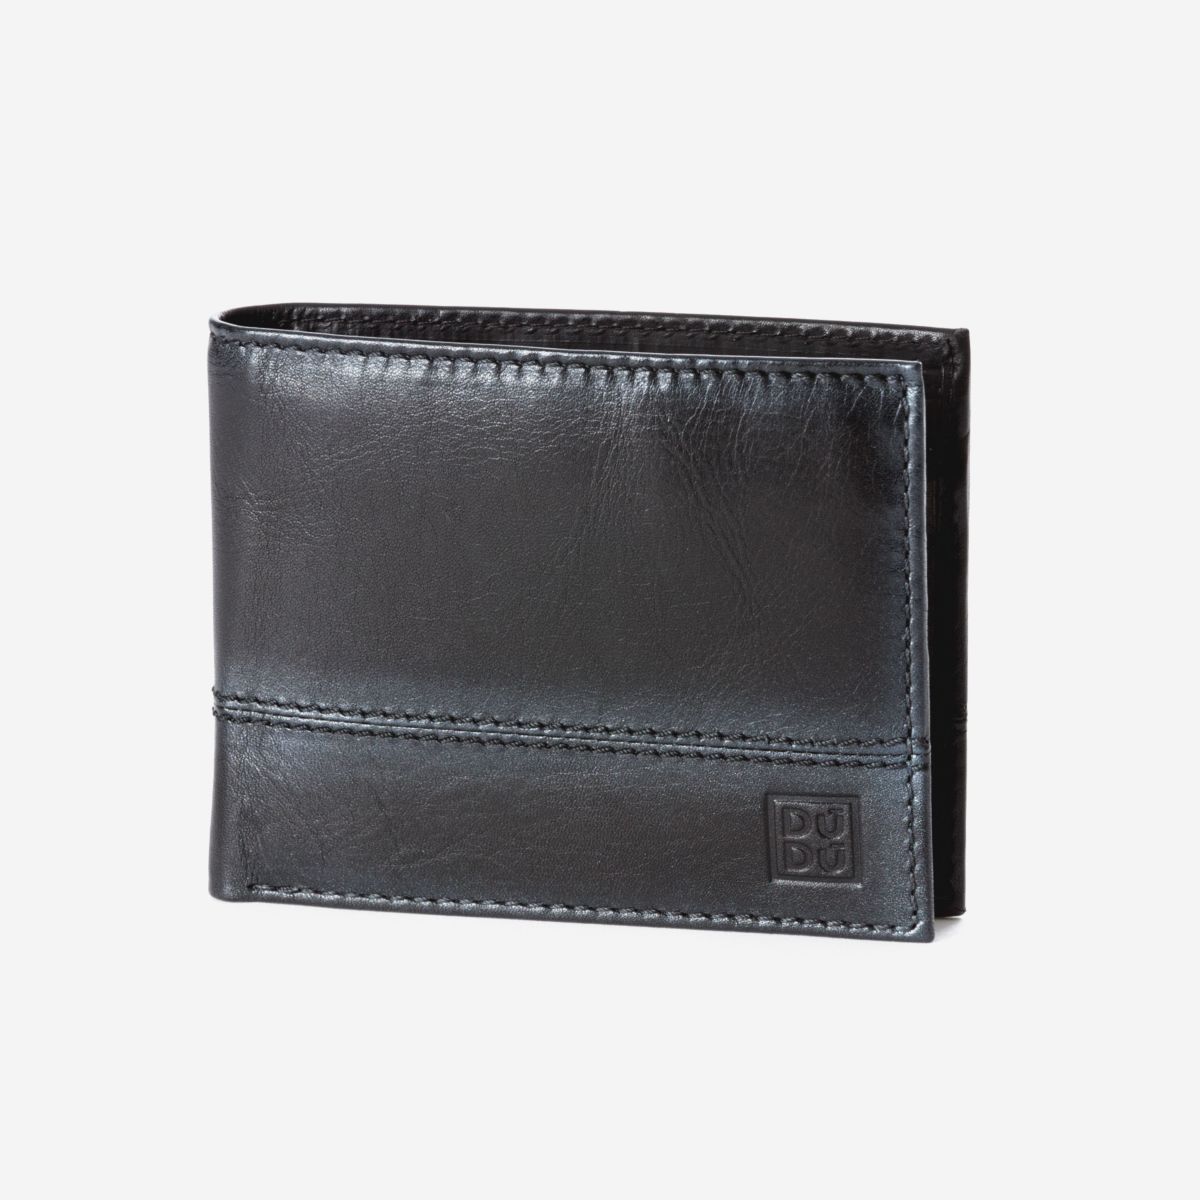 Mens Leather Wallet with Coin Pocket - Black